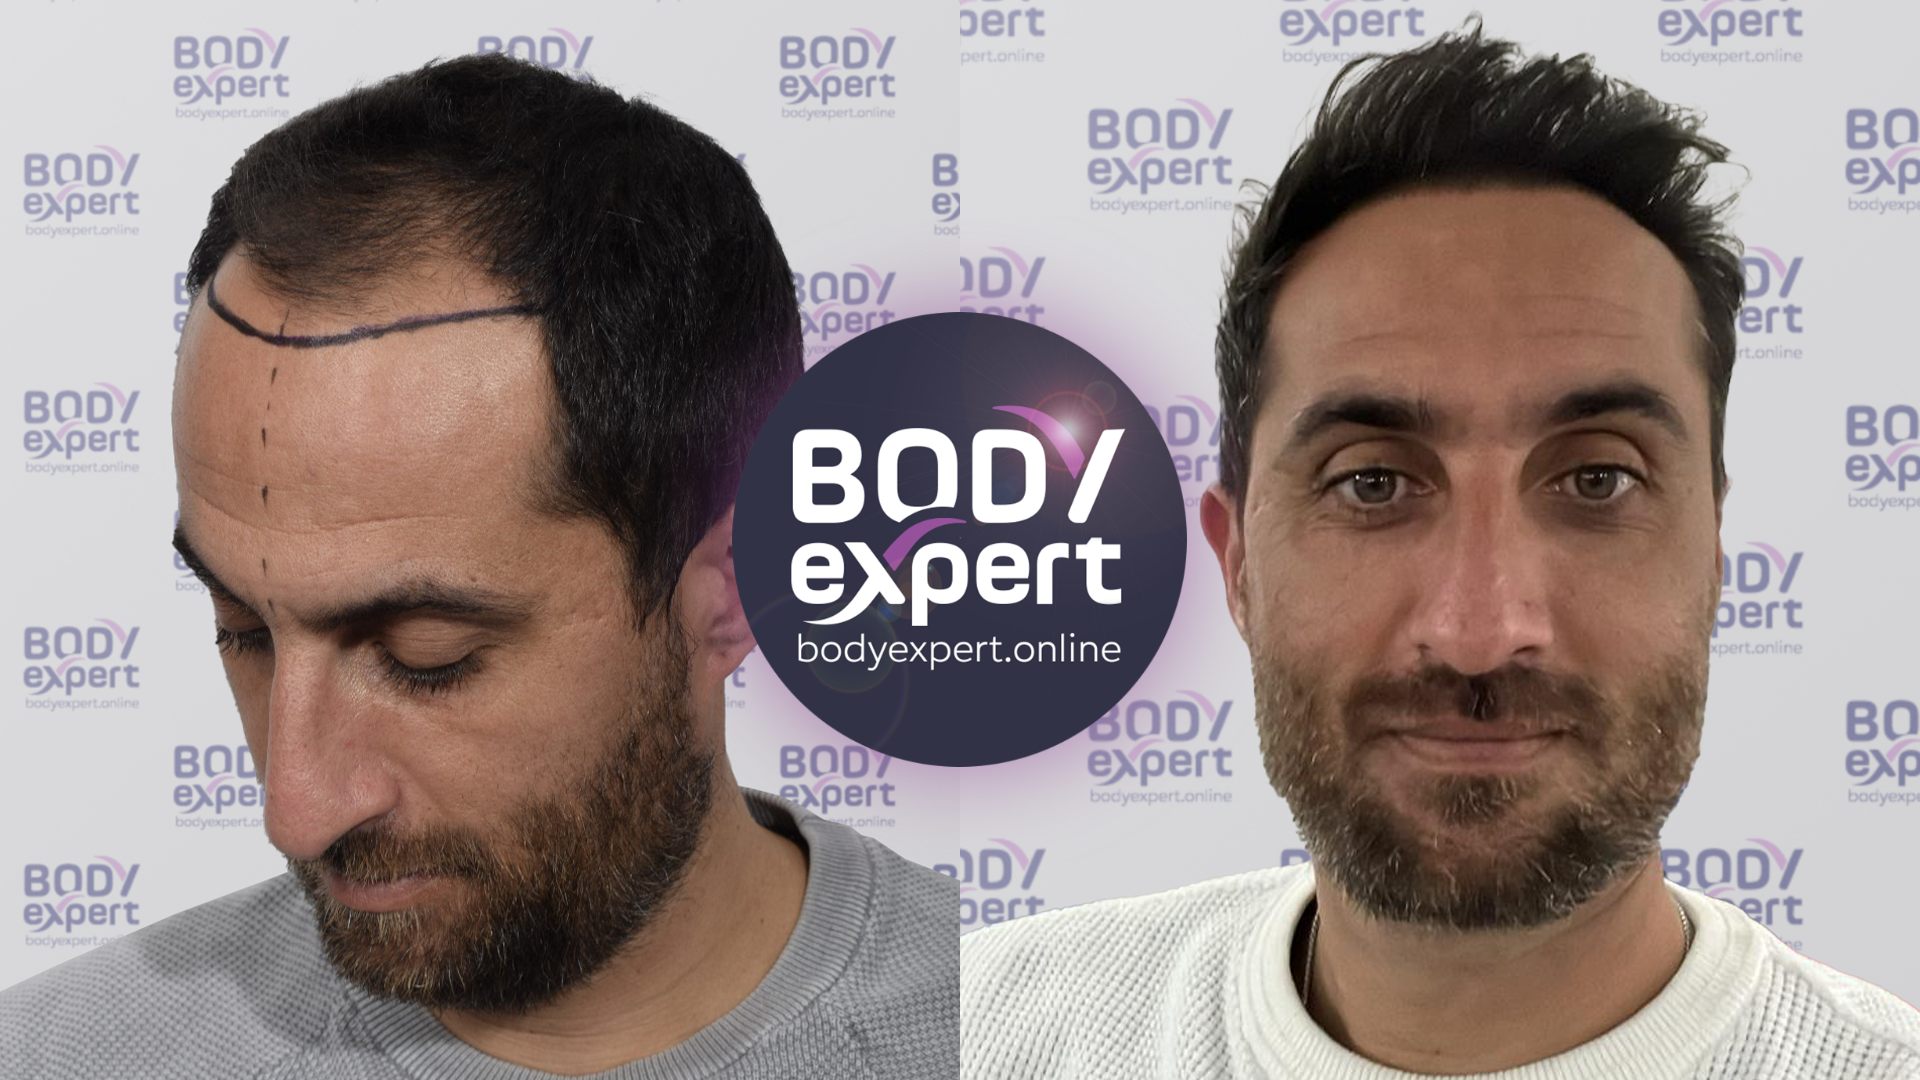 DHI hair transplant for Olivier, with 2500 grafts implanted. Photos before and 10 months after the operation.